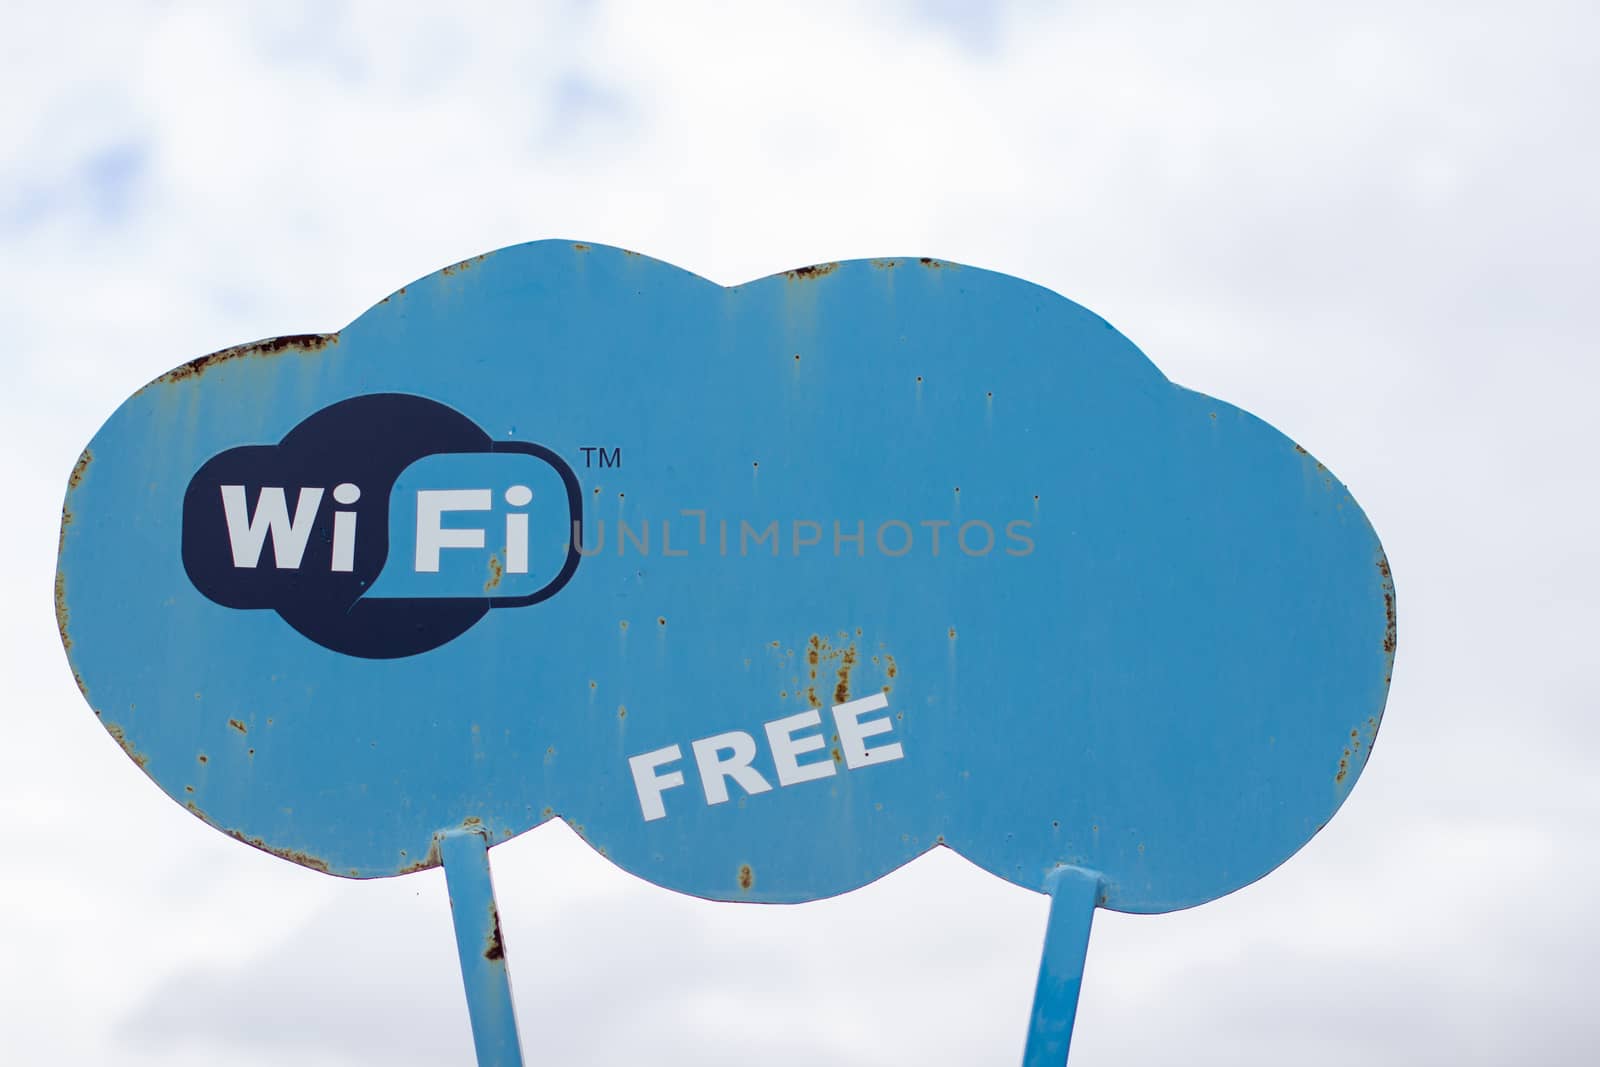 A blue sign in the Park that says WiFi. Wireless Internet access